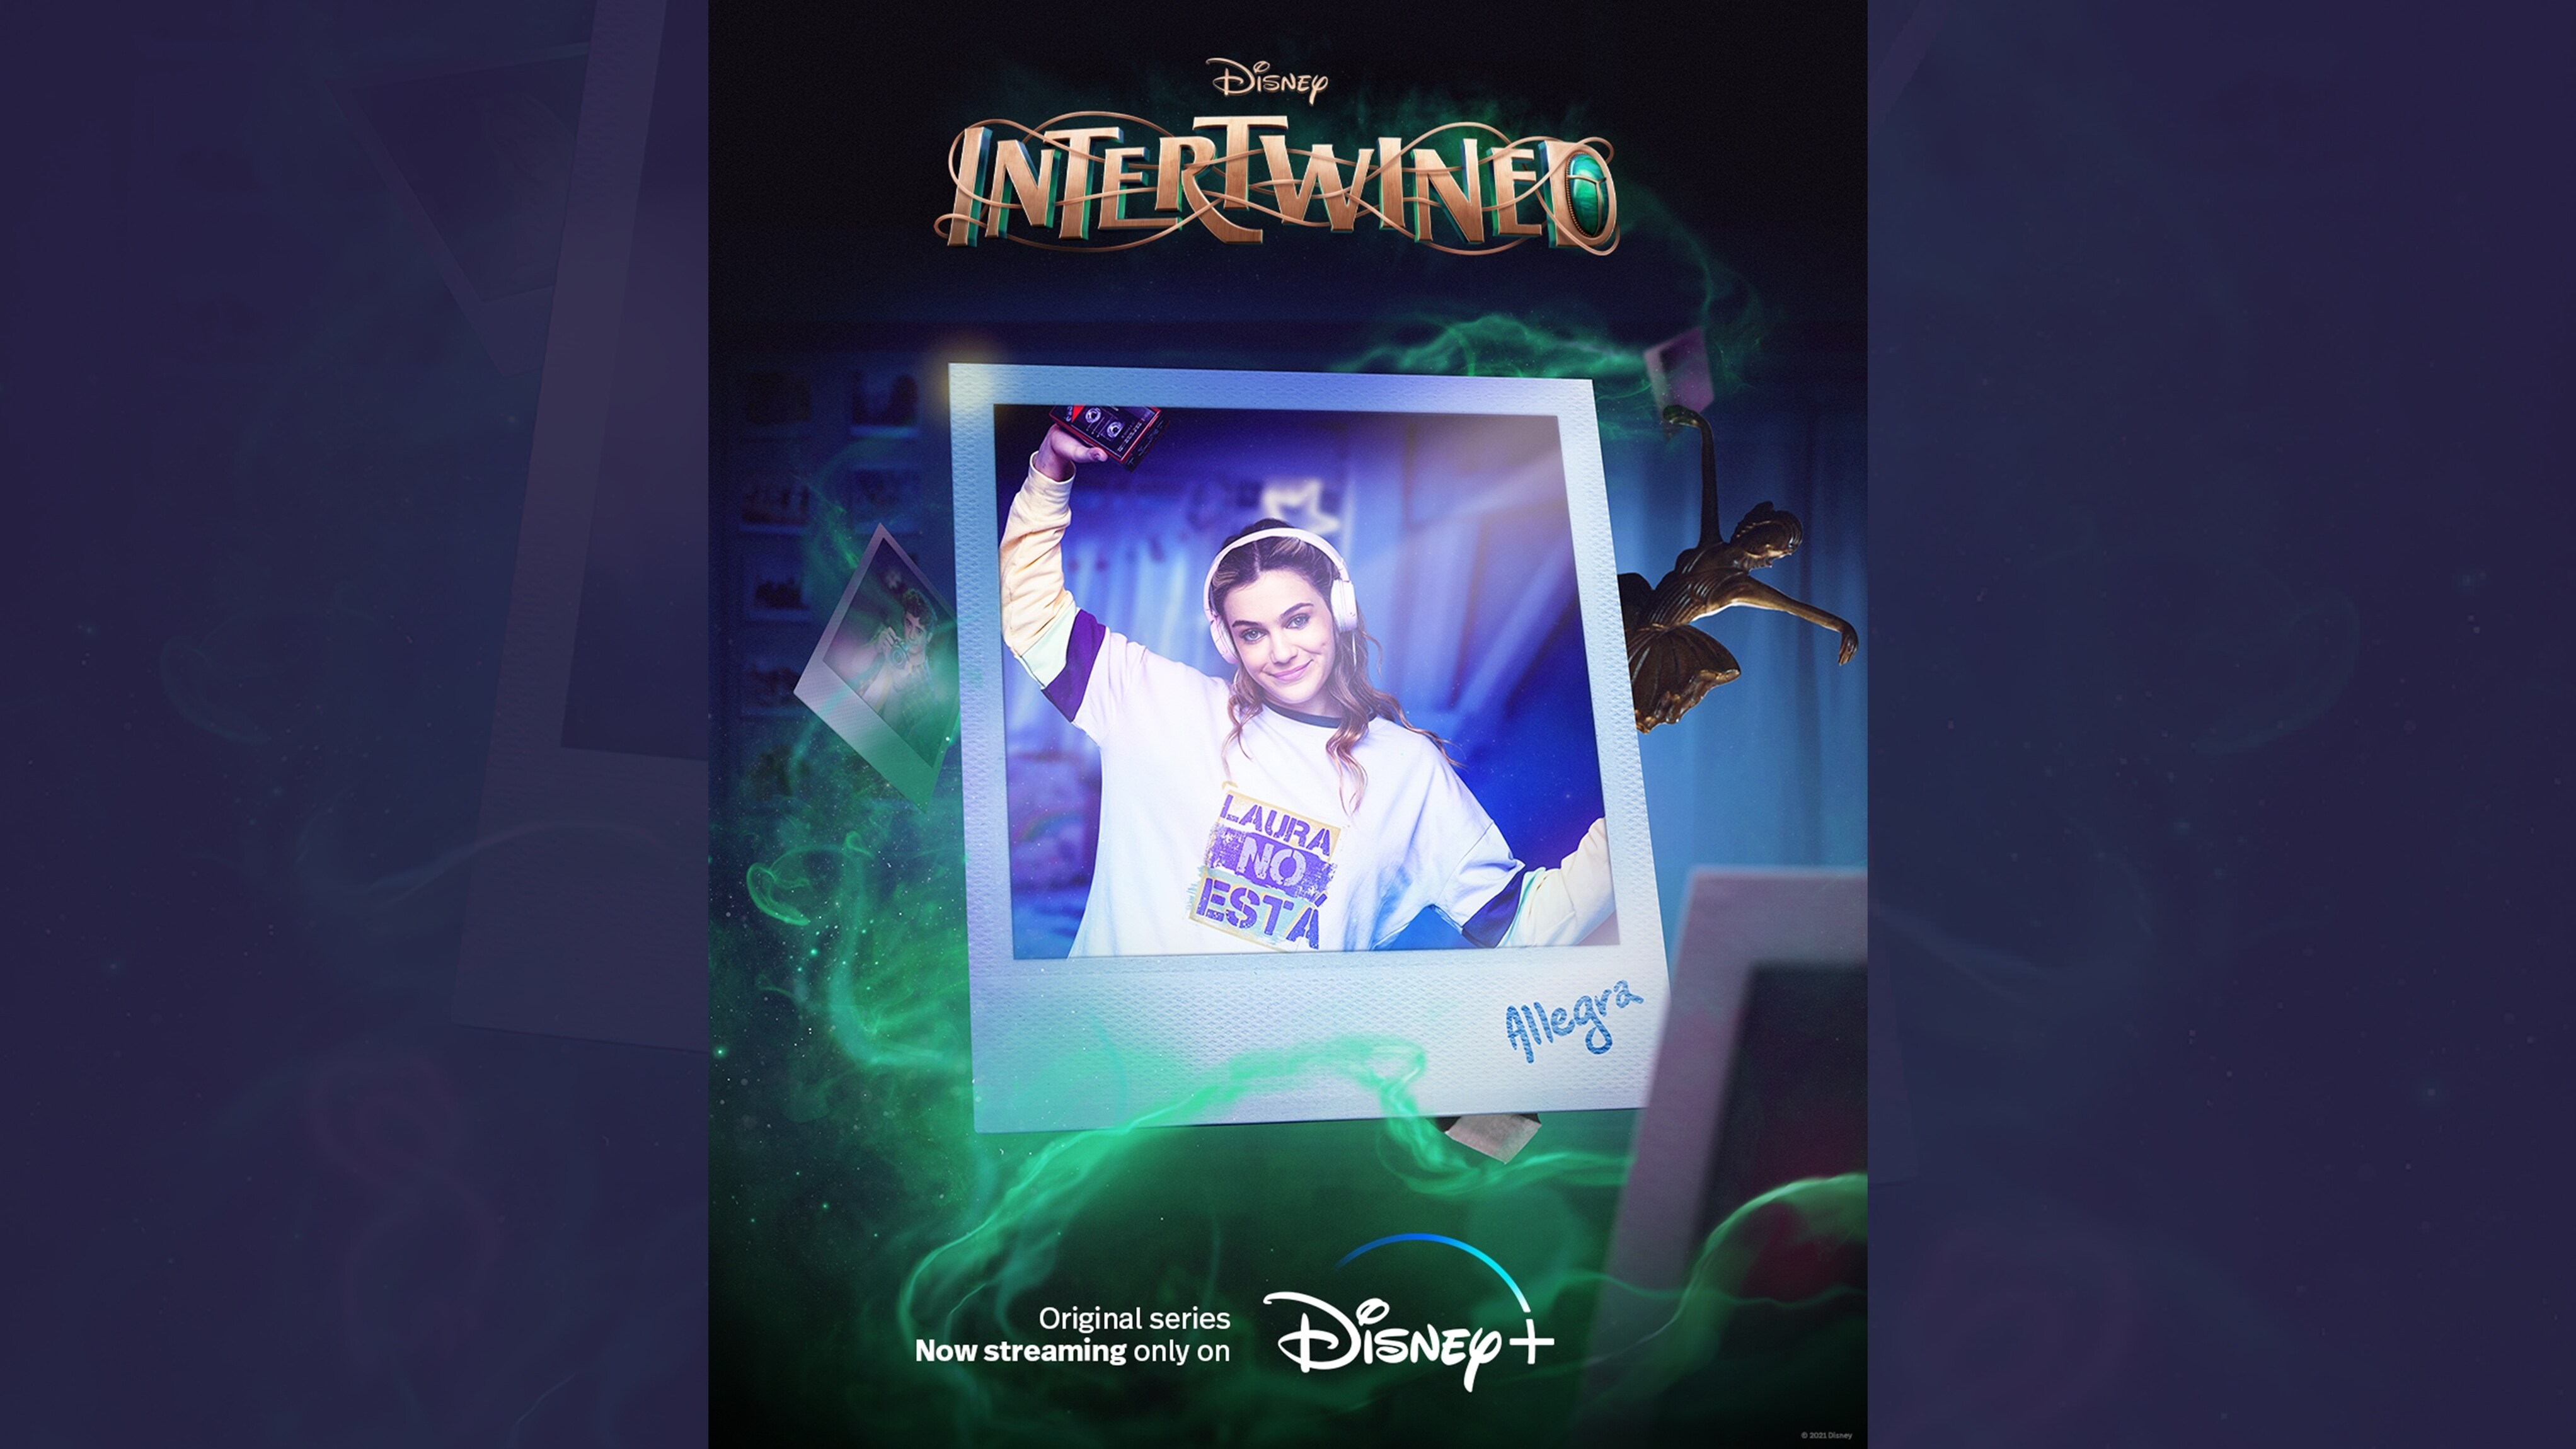 Disney | Intertwined | Allegra | Original series now streaming only on Disney+